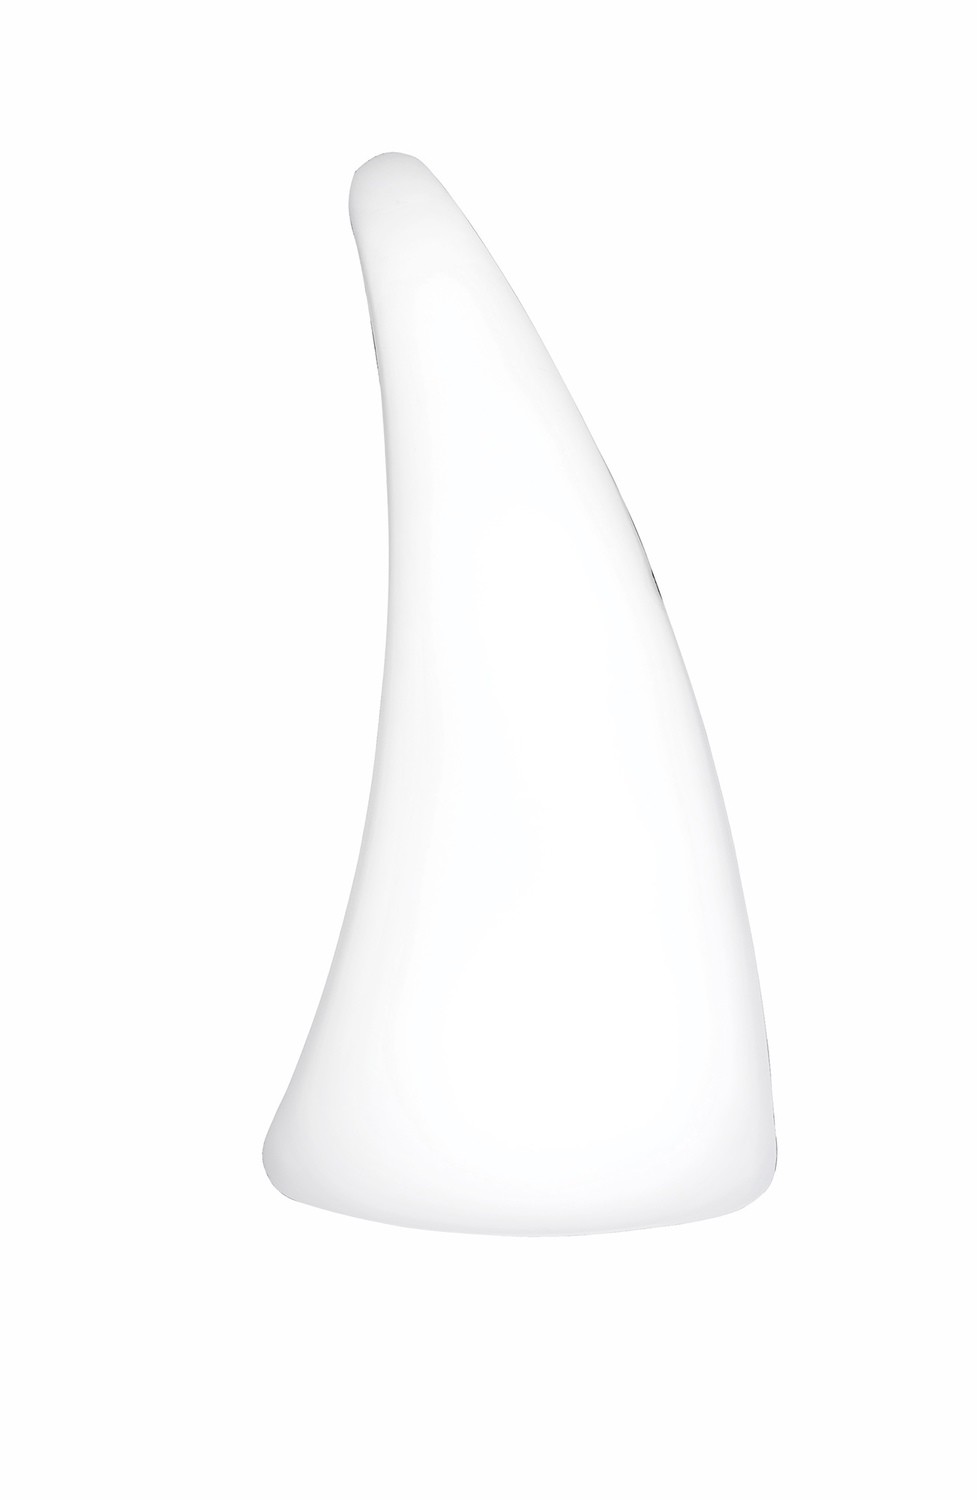 Mistral Wall Lamp Left 6W LED 3000K, 540lm, Polished Chrome/Frosted Acrylic, 3yrs Warranty